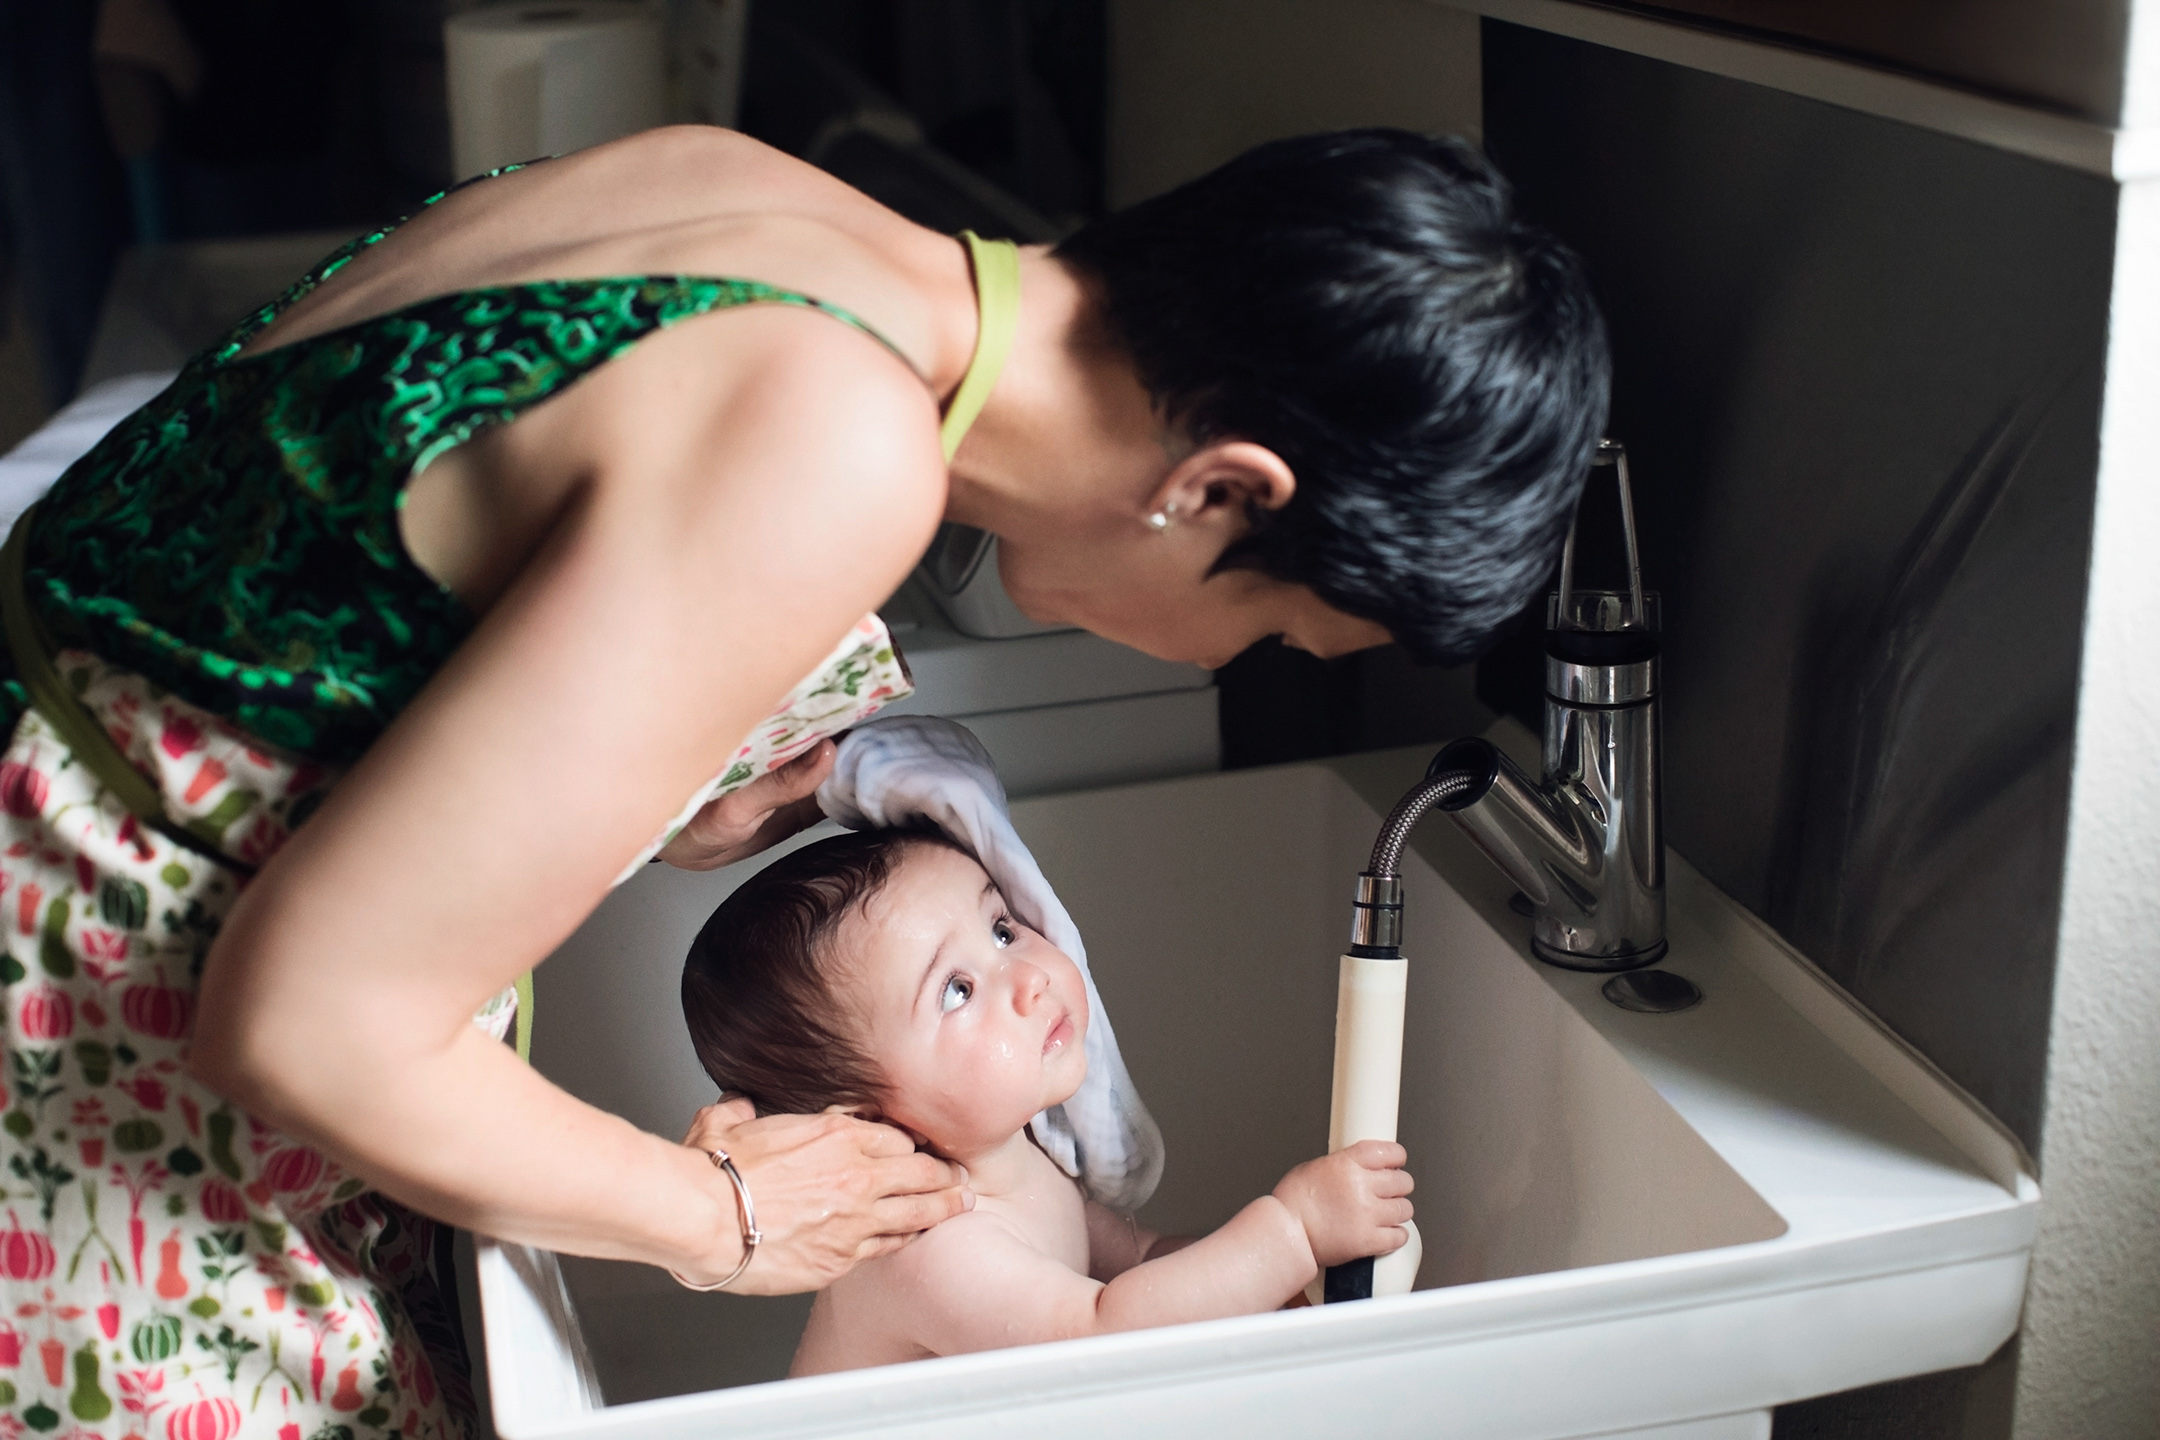 A woman bathes her infant son in a laundry room sink